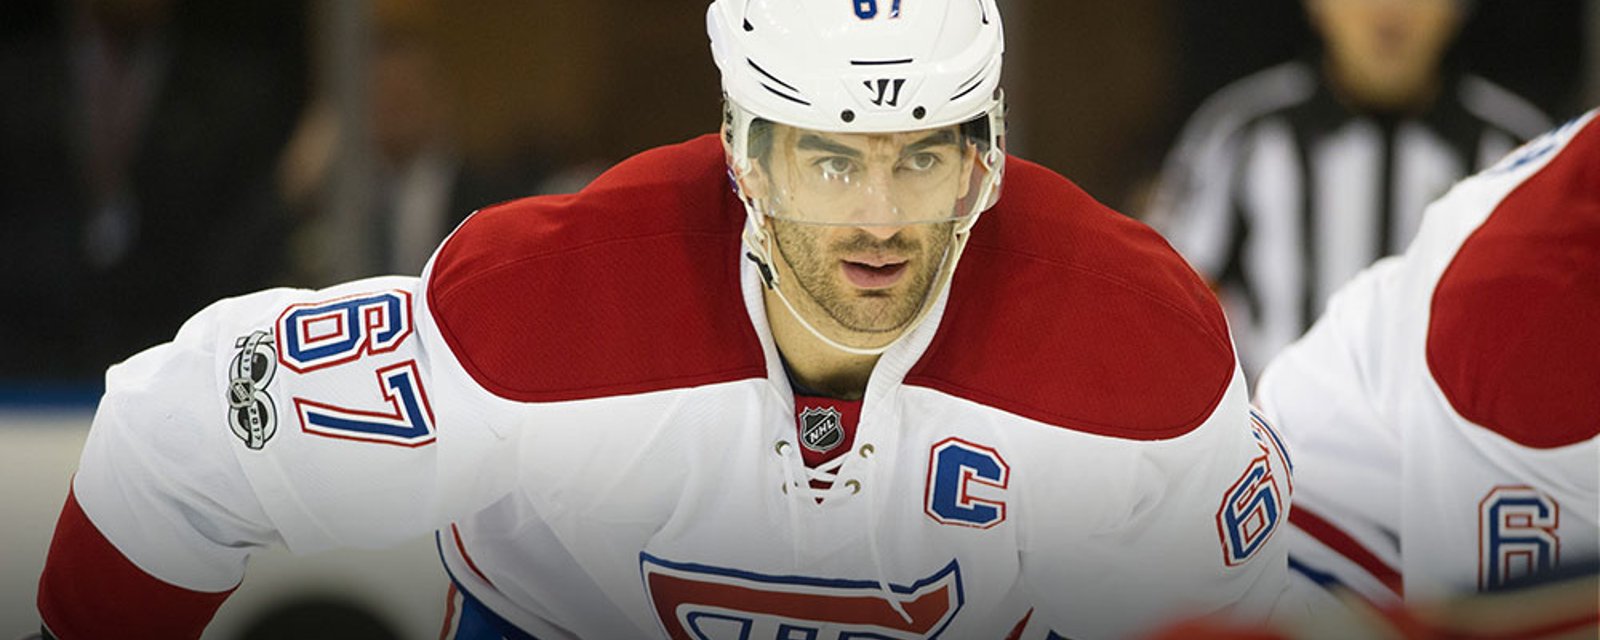 Breaking: Shocking personal news for Habs captain Pacioretty